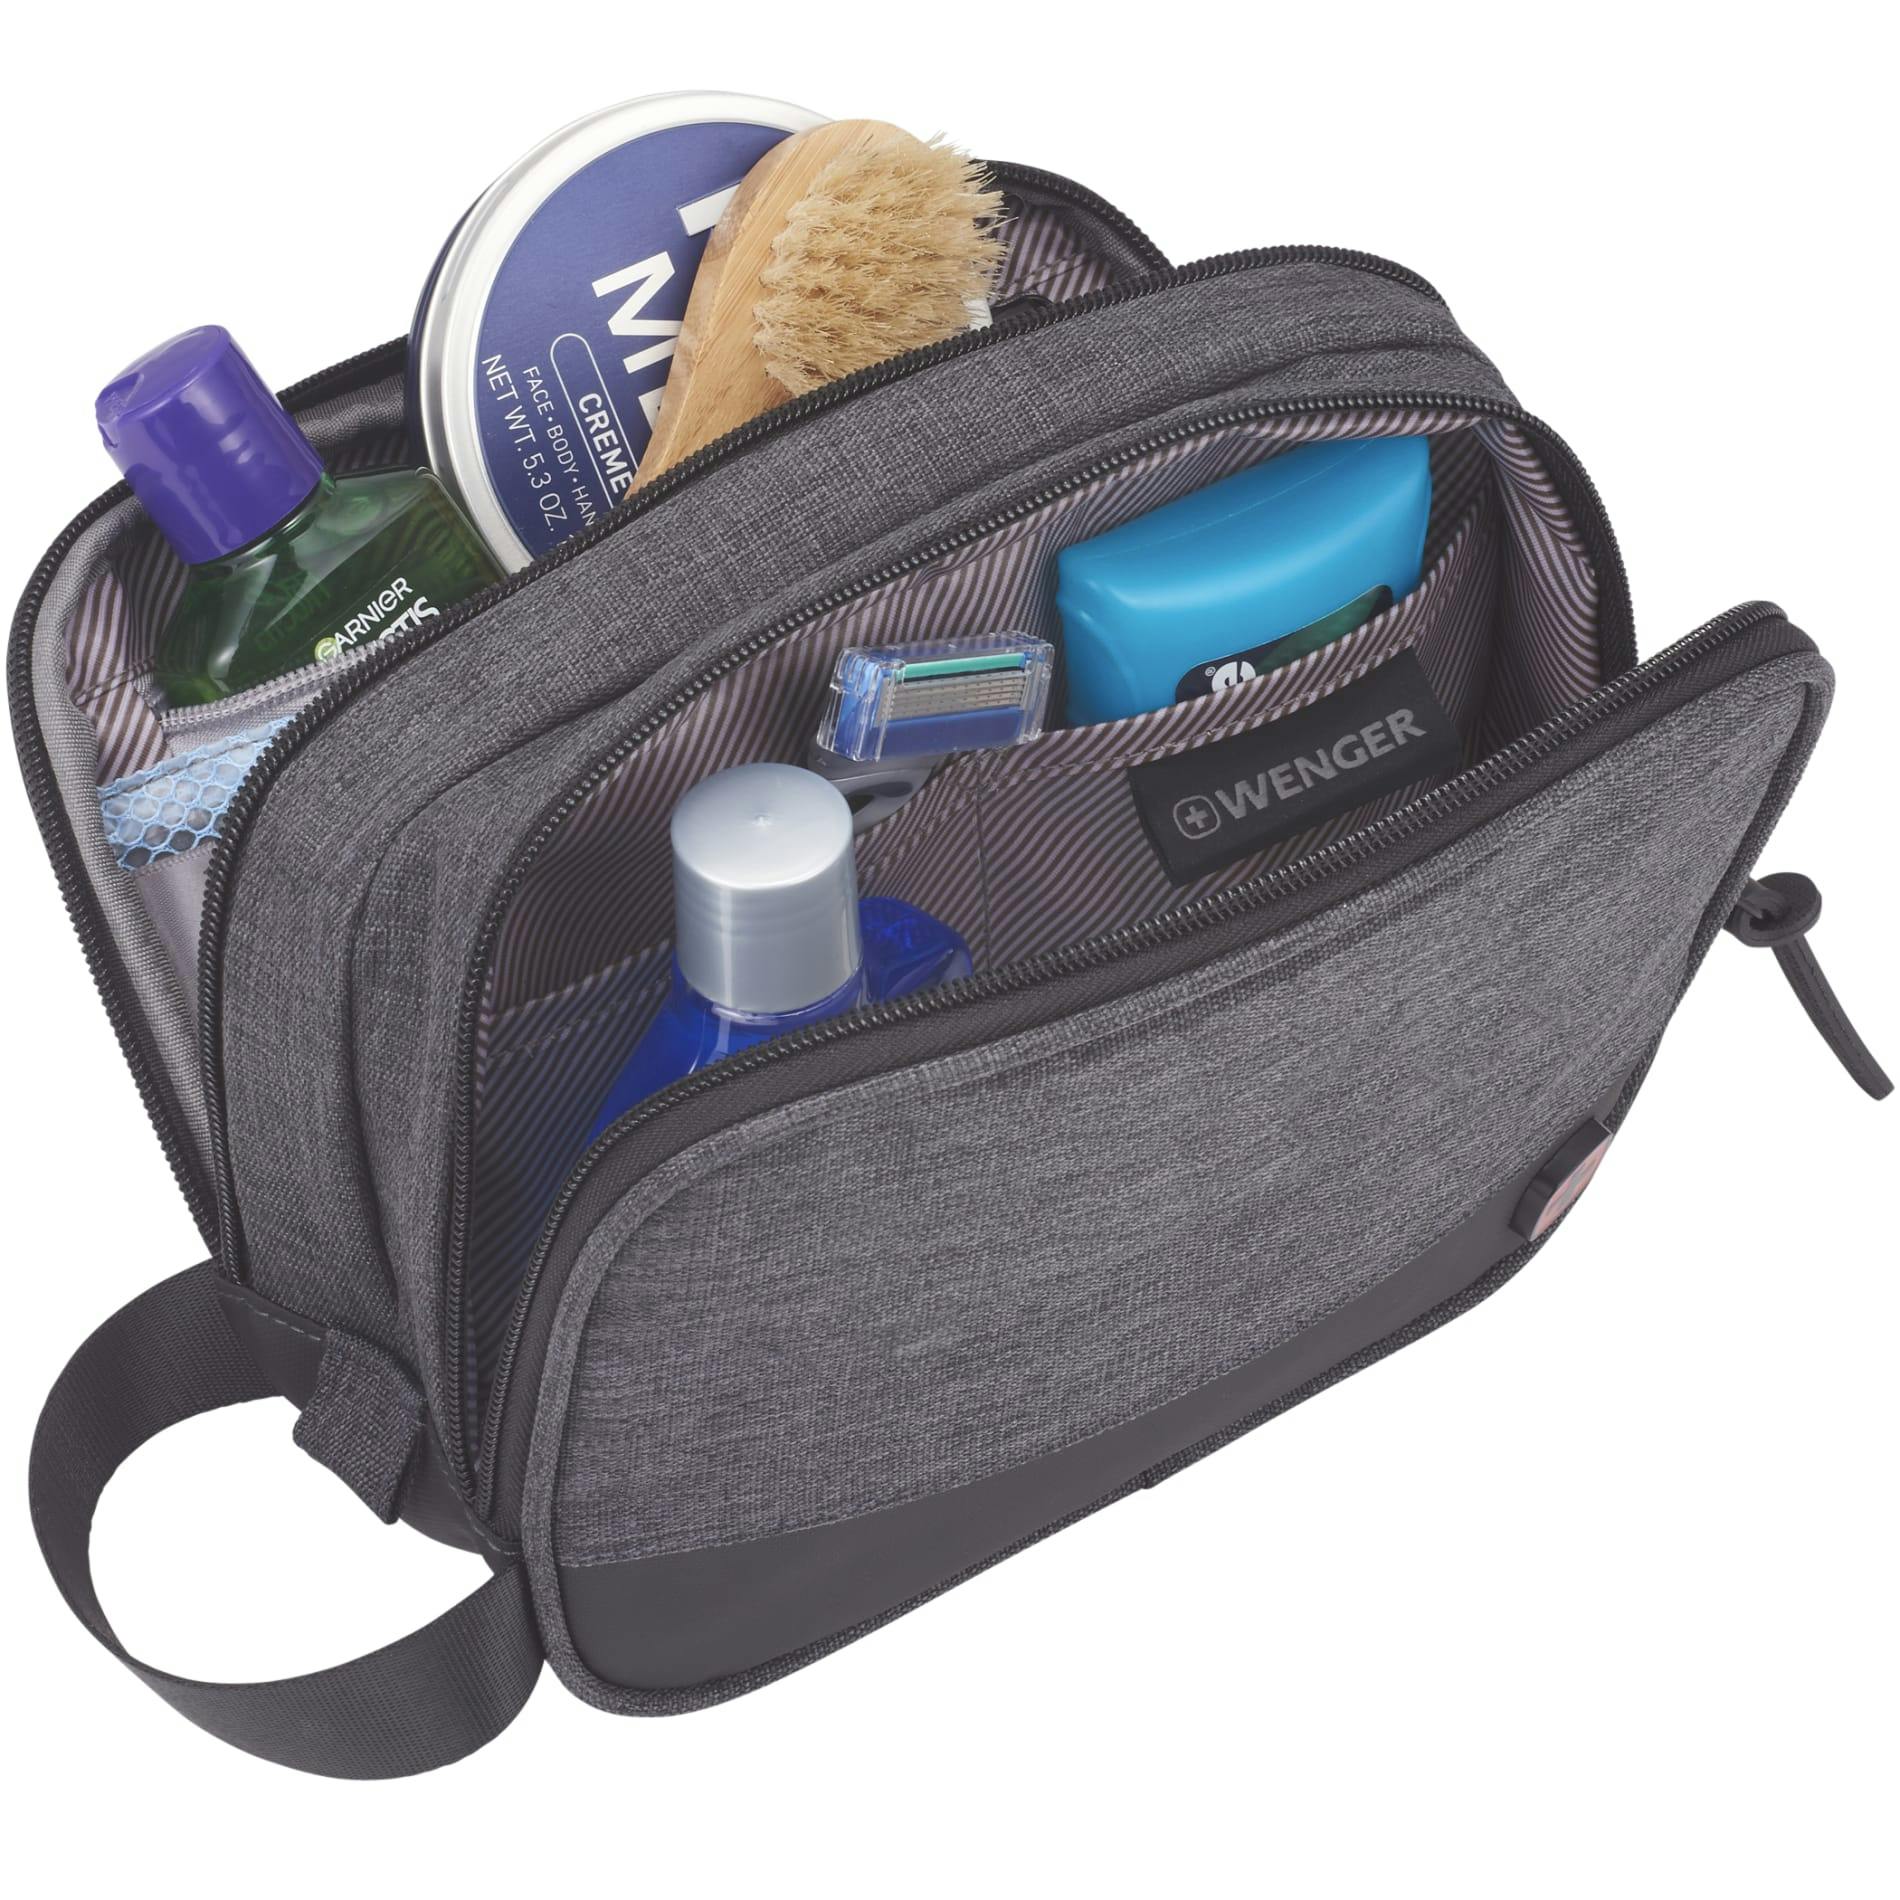 Wenger RPET Dual Compartment Dopp Kit - additional Image 7